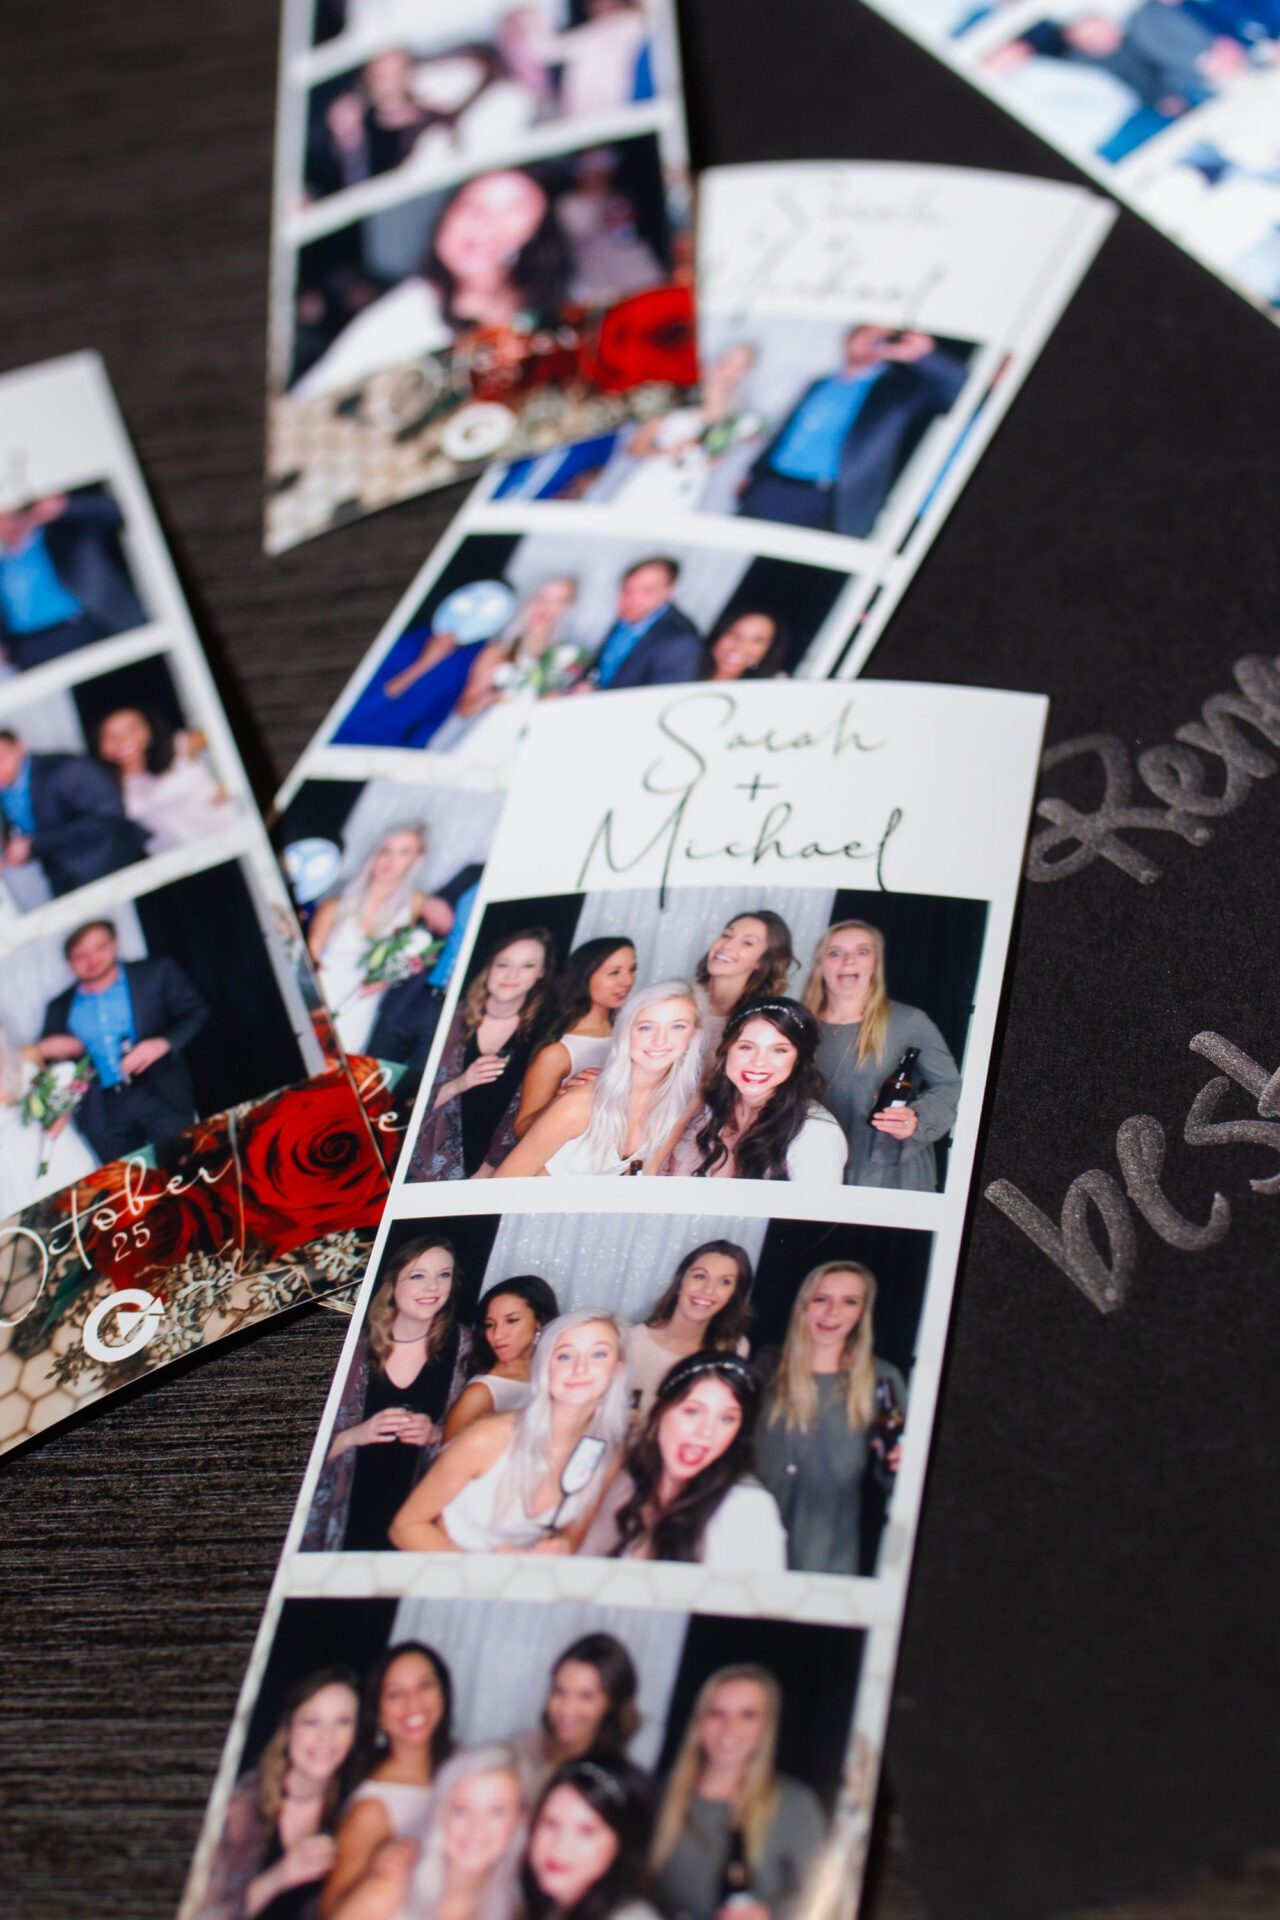 photobooth strips from wedding reception